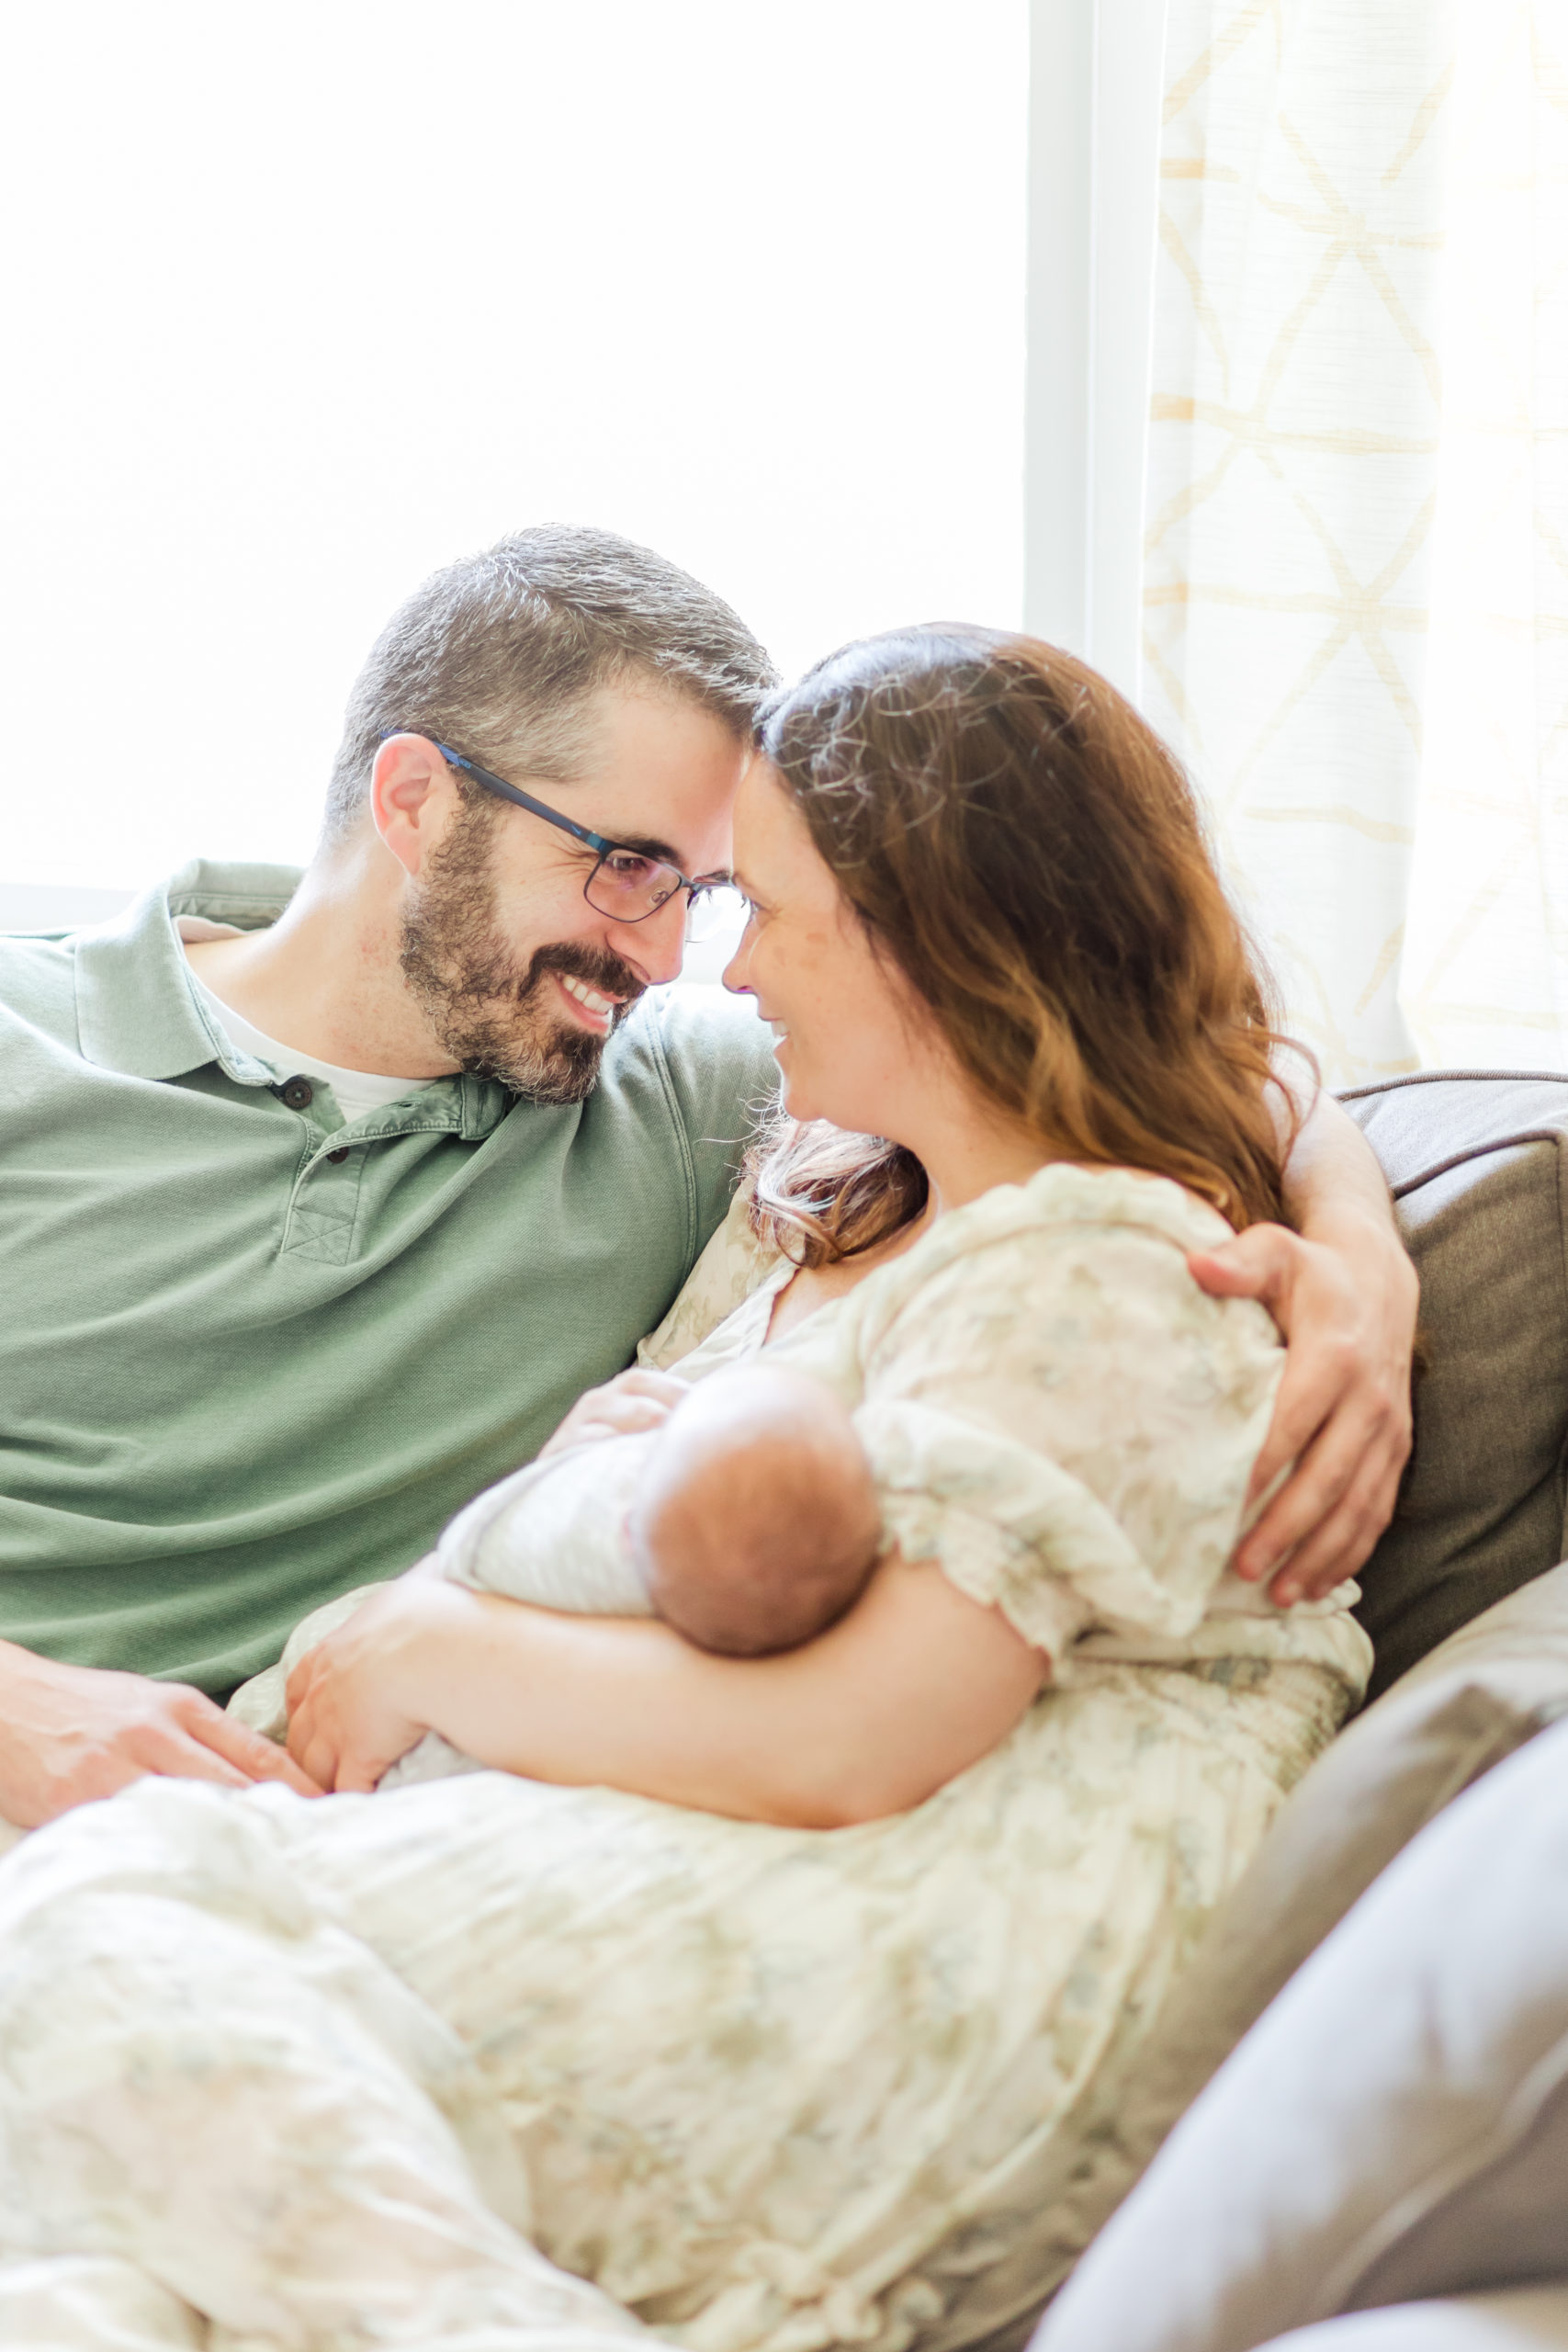 Newborn baby being held by their mother with father / Boston Area Newborn Photographer Corinne Isabelle